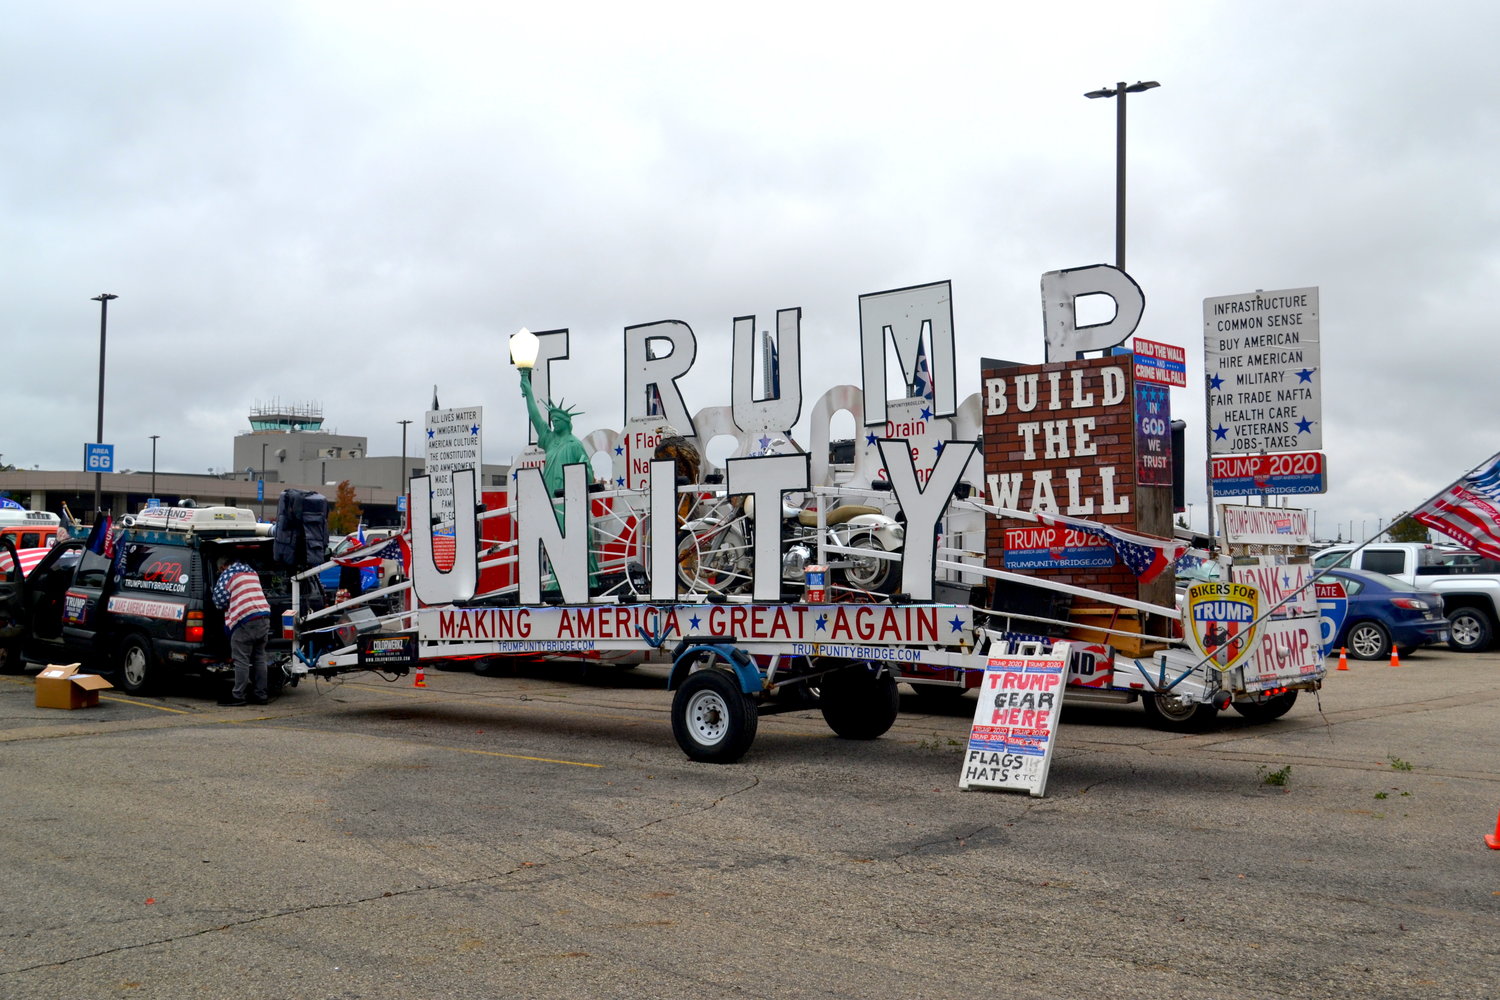 A float seen on Capitol Avenue during both Trump rallies and civil rights rallies was on site at the airport.